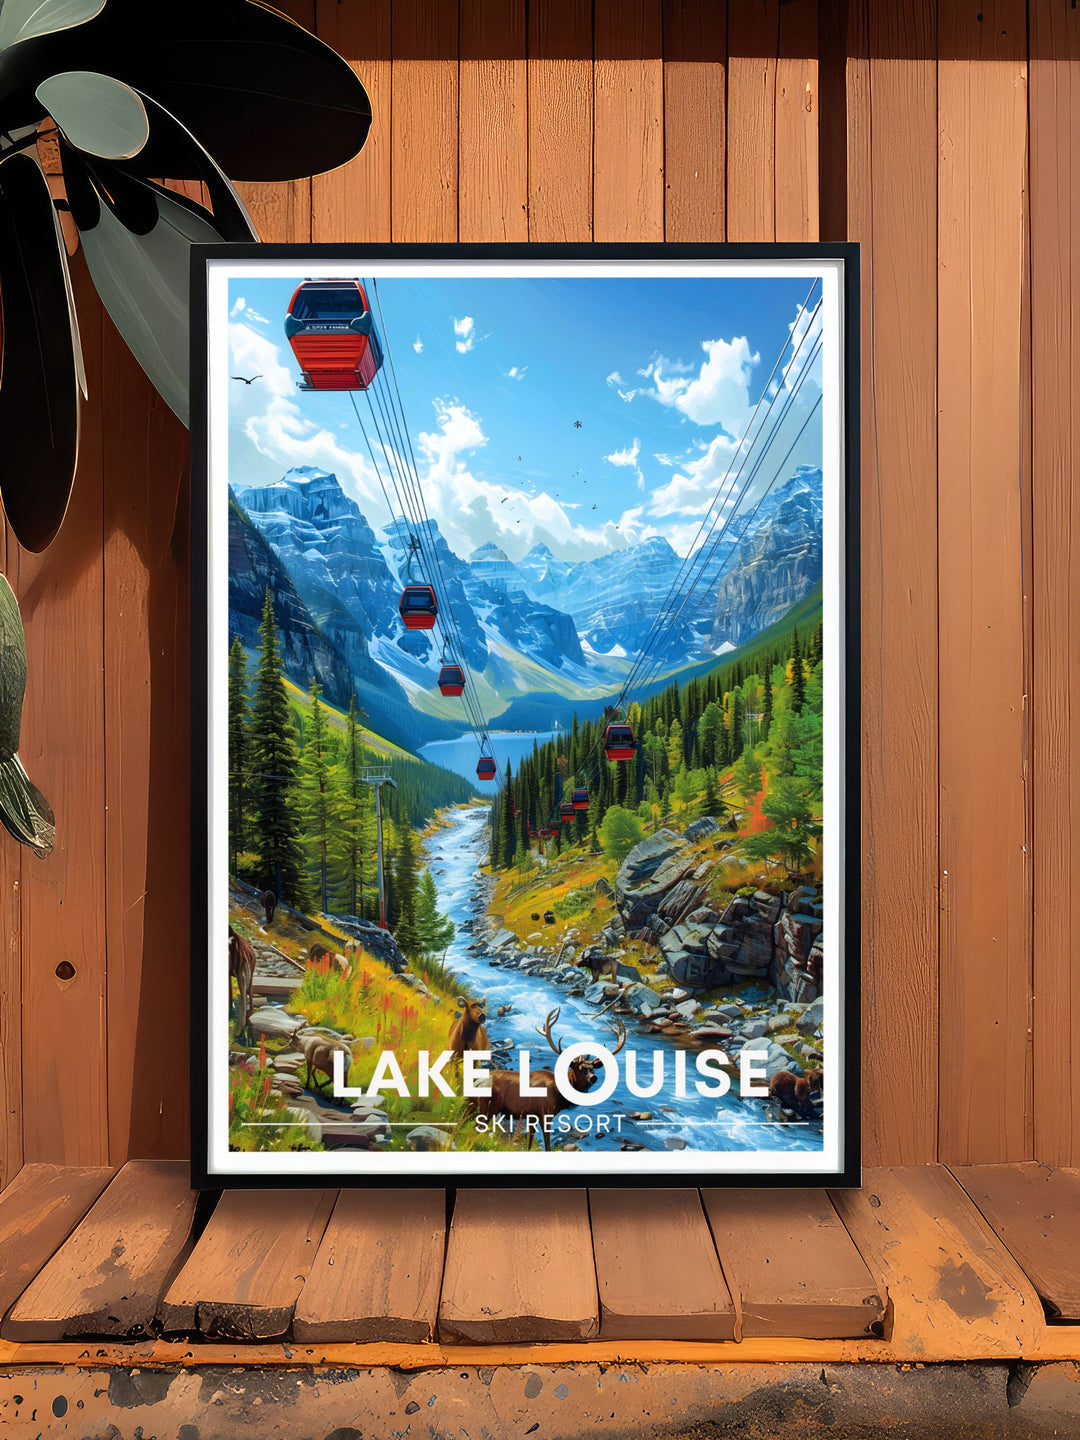 This poster captures the exhilarating experience of skiing at Lake Louise Ski Resort, with its stunning mountain scenery and dynamic atmosphere, inviting viewers to join the adventure.